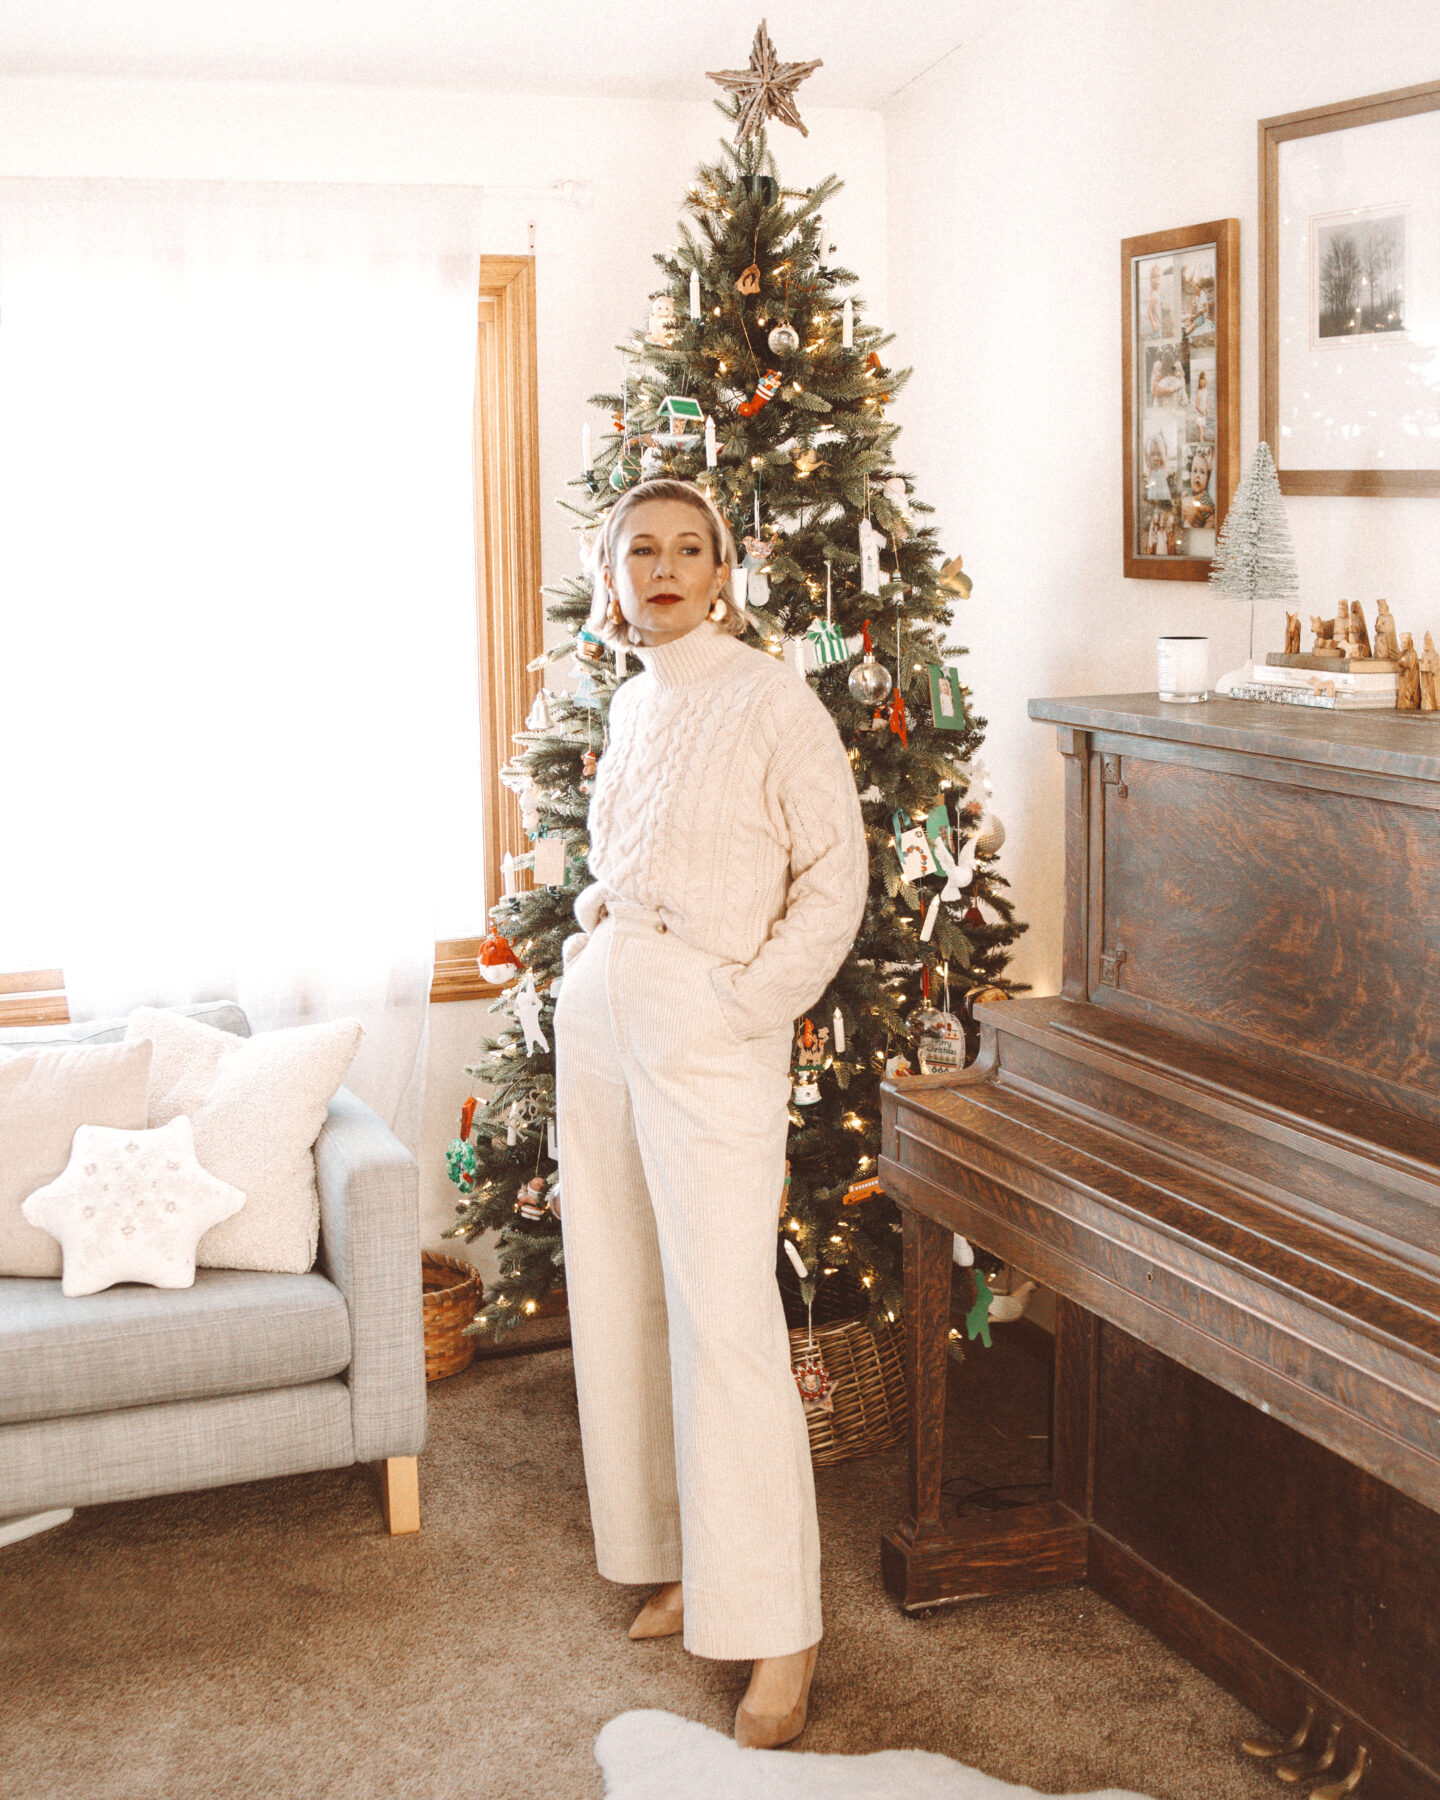 Karin Emily wears a holiday party outfit with a cream turtleneck cropped sweater, cream corduroy wide leg pants, and nude heels in front of her Christmas tree